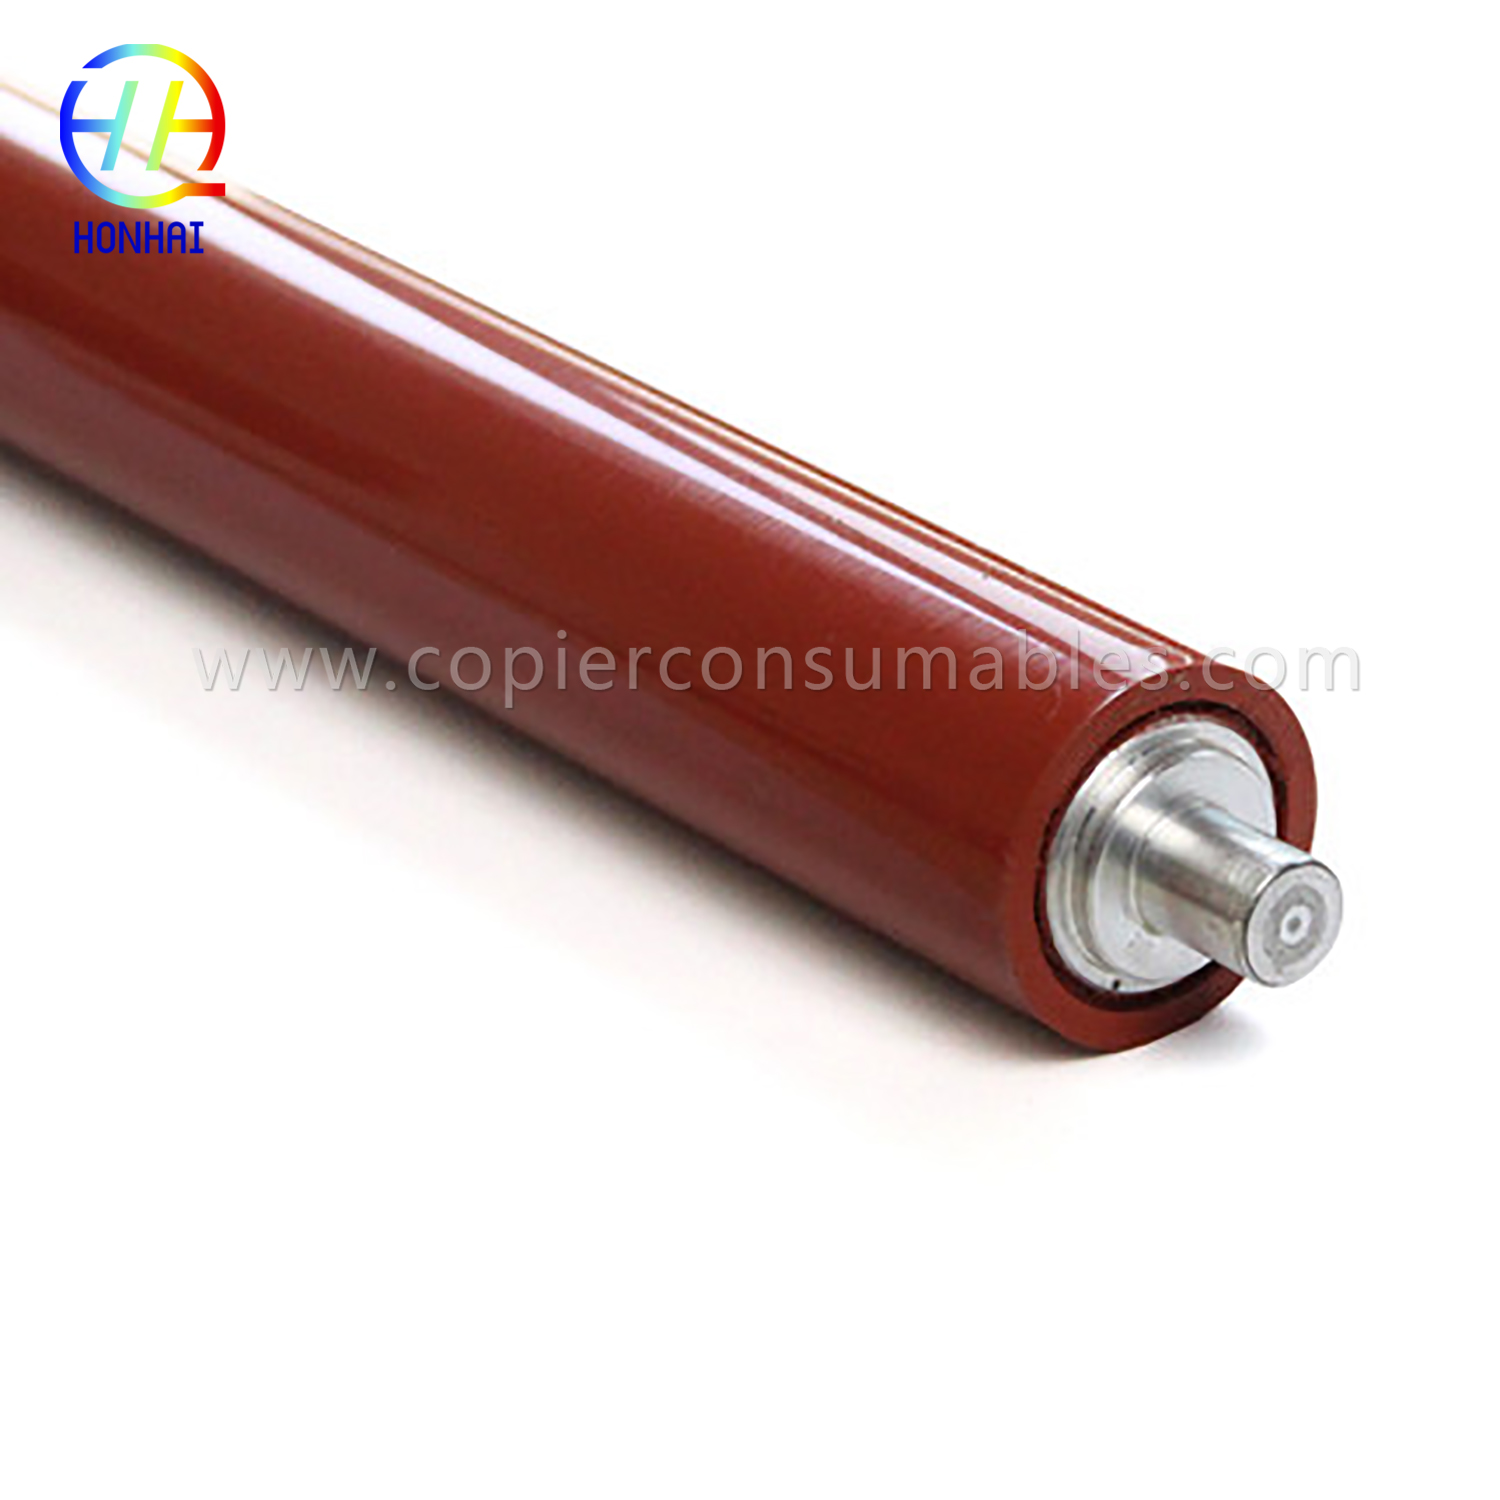 Lower Pressure Roller for HP 5200 不要盒子 (3) 拷贝